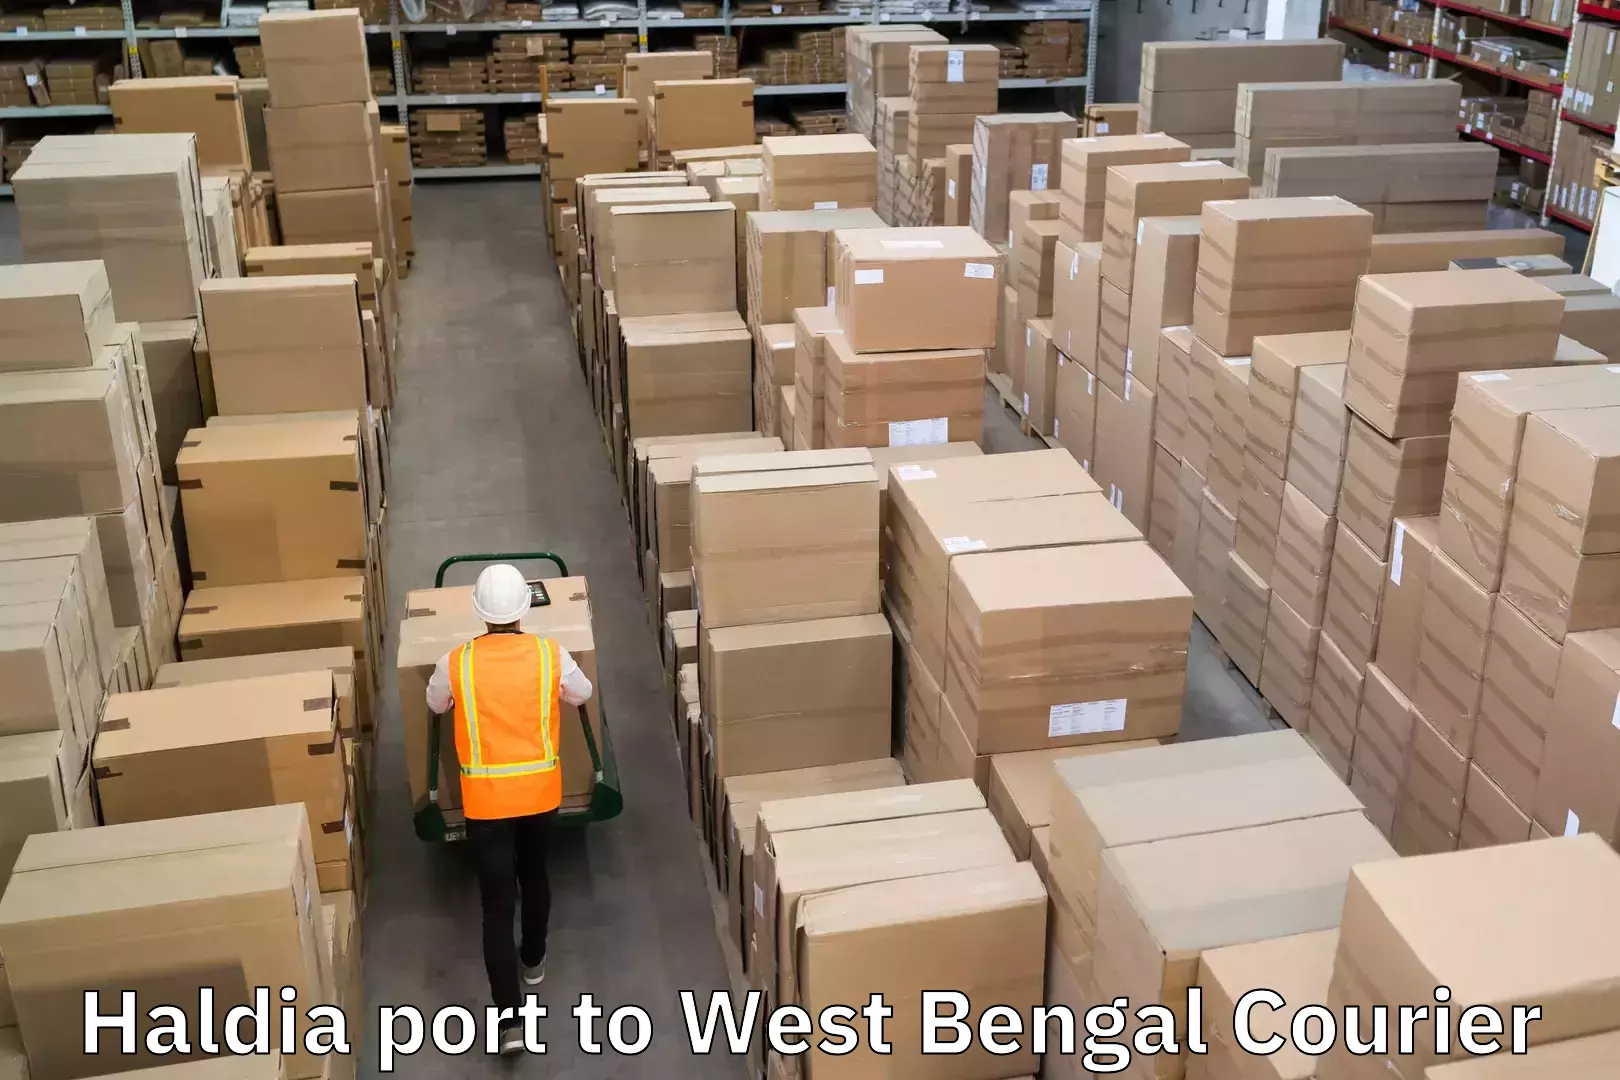 Reliable logistics providers in Haldia port to Hooghly